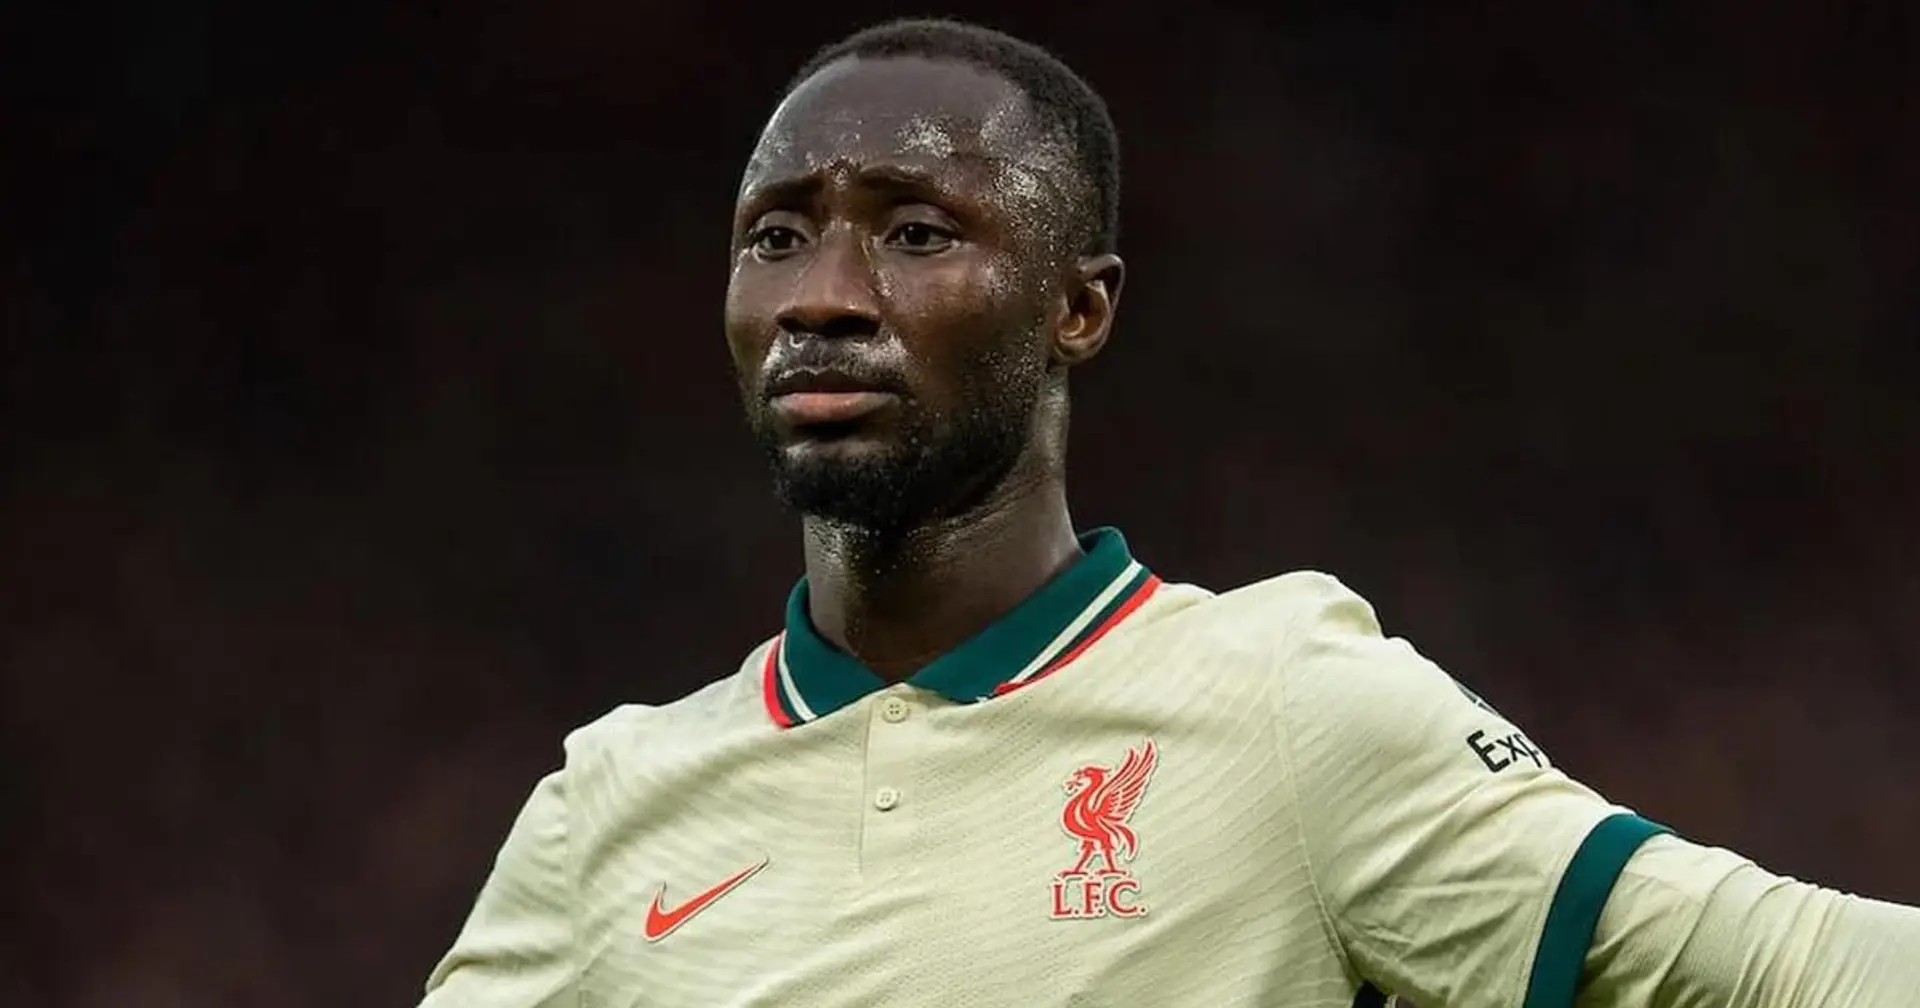 Keita's message to fans: 'You've not seen the real Naby Keita yet'